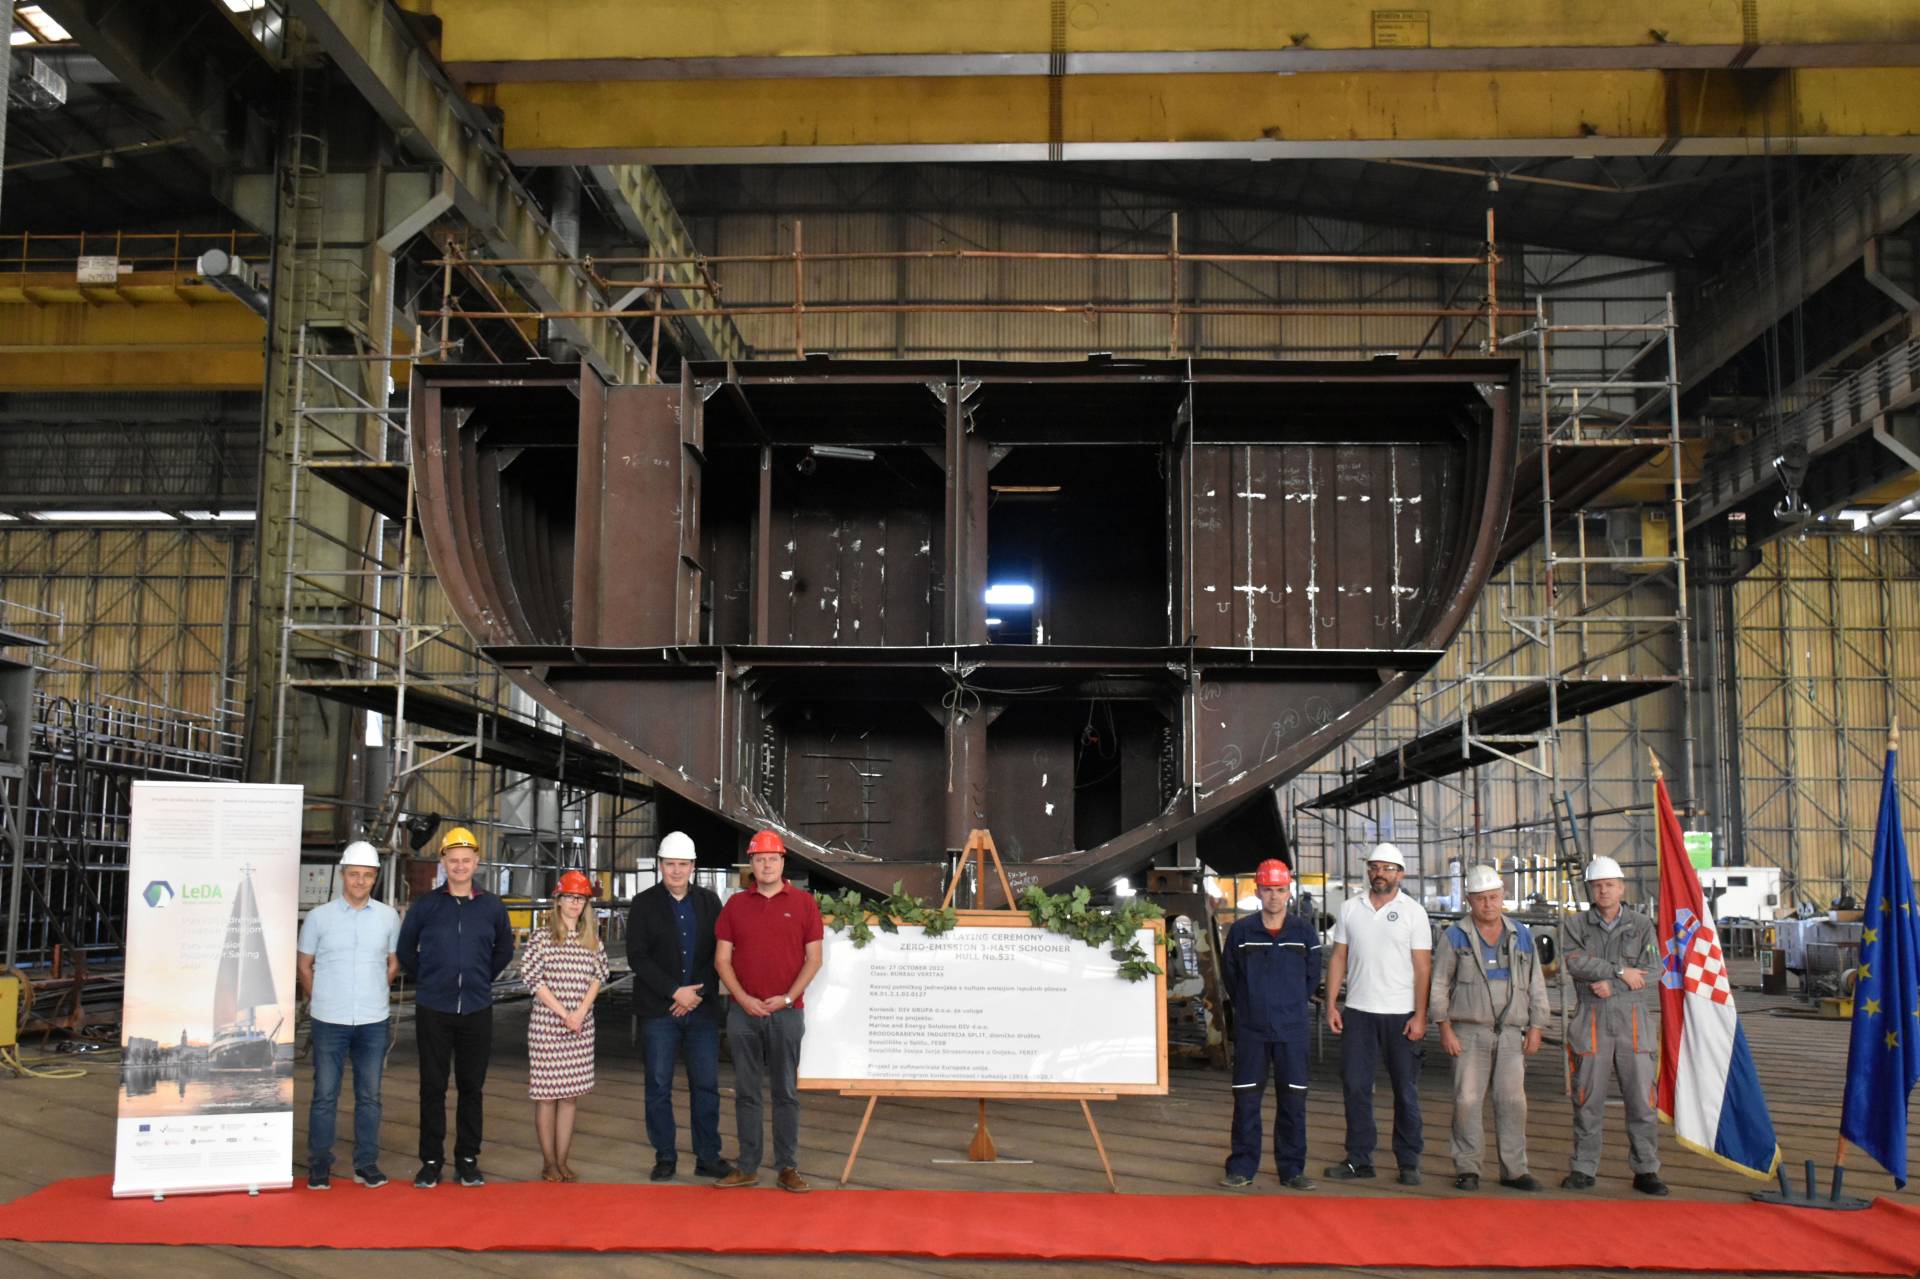 Keel Laying For A Zero Emission Passenger Sailing Ship. The keel-laying of the zero-emission passenger sailing ship with electric motors as the main drive, took place at the Brodosplit shipyard  (Image at LateCruiseNews.com - October 2022)